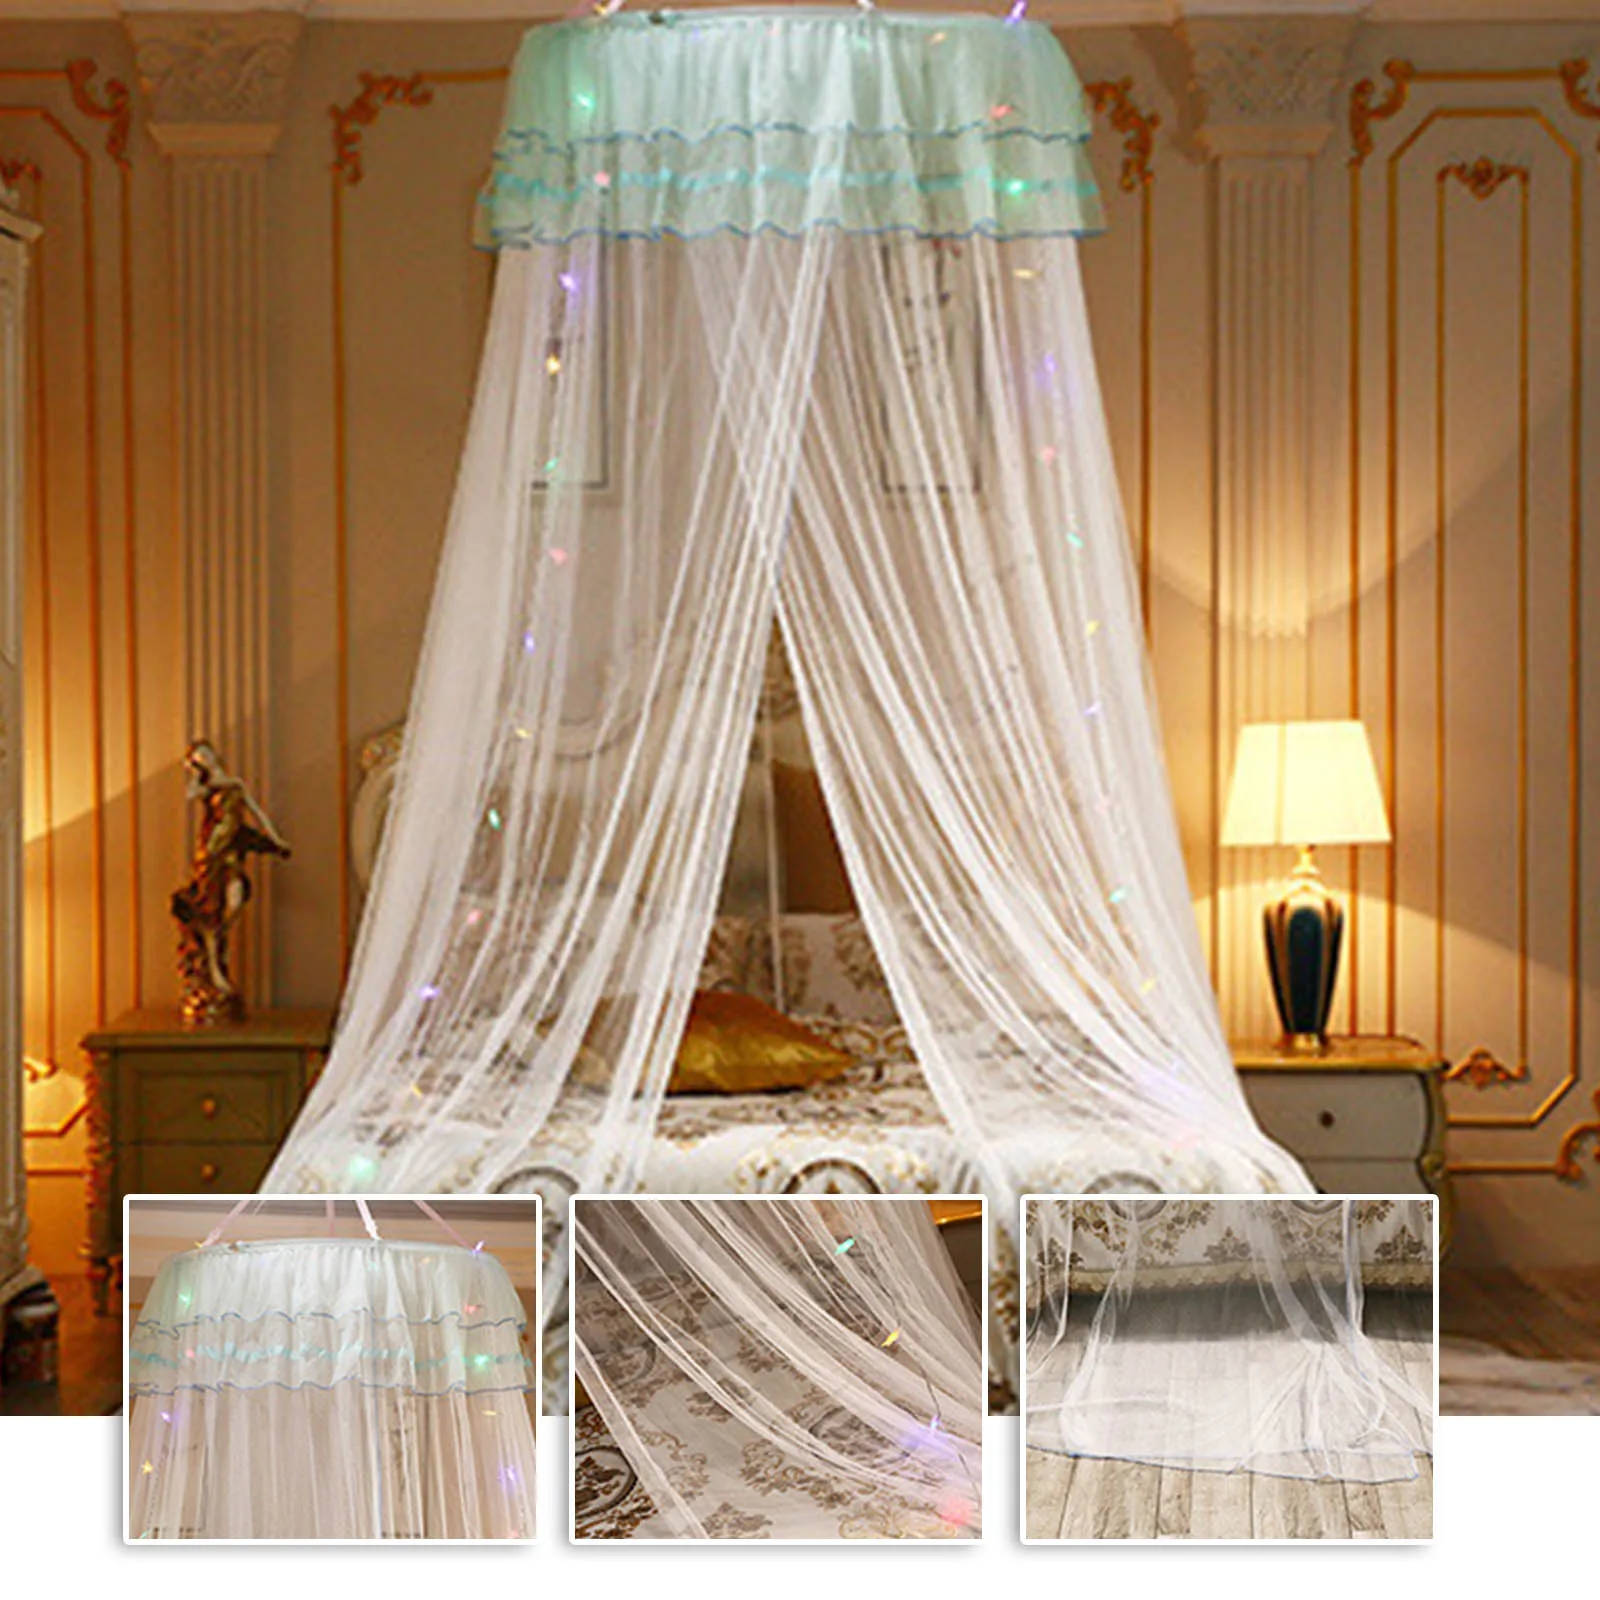 VOVI Mosquito Bed Net Canopy Luxury Princess Hanging Round Lace Curtains Tent Full Canopy Bed Netting Student Dome Mosquito Net Crib Twin Full Queen Bed